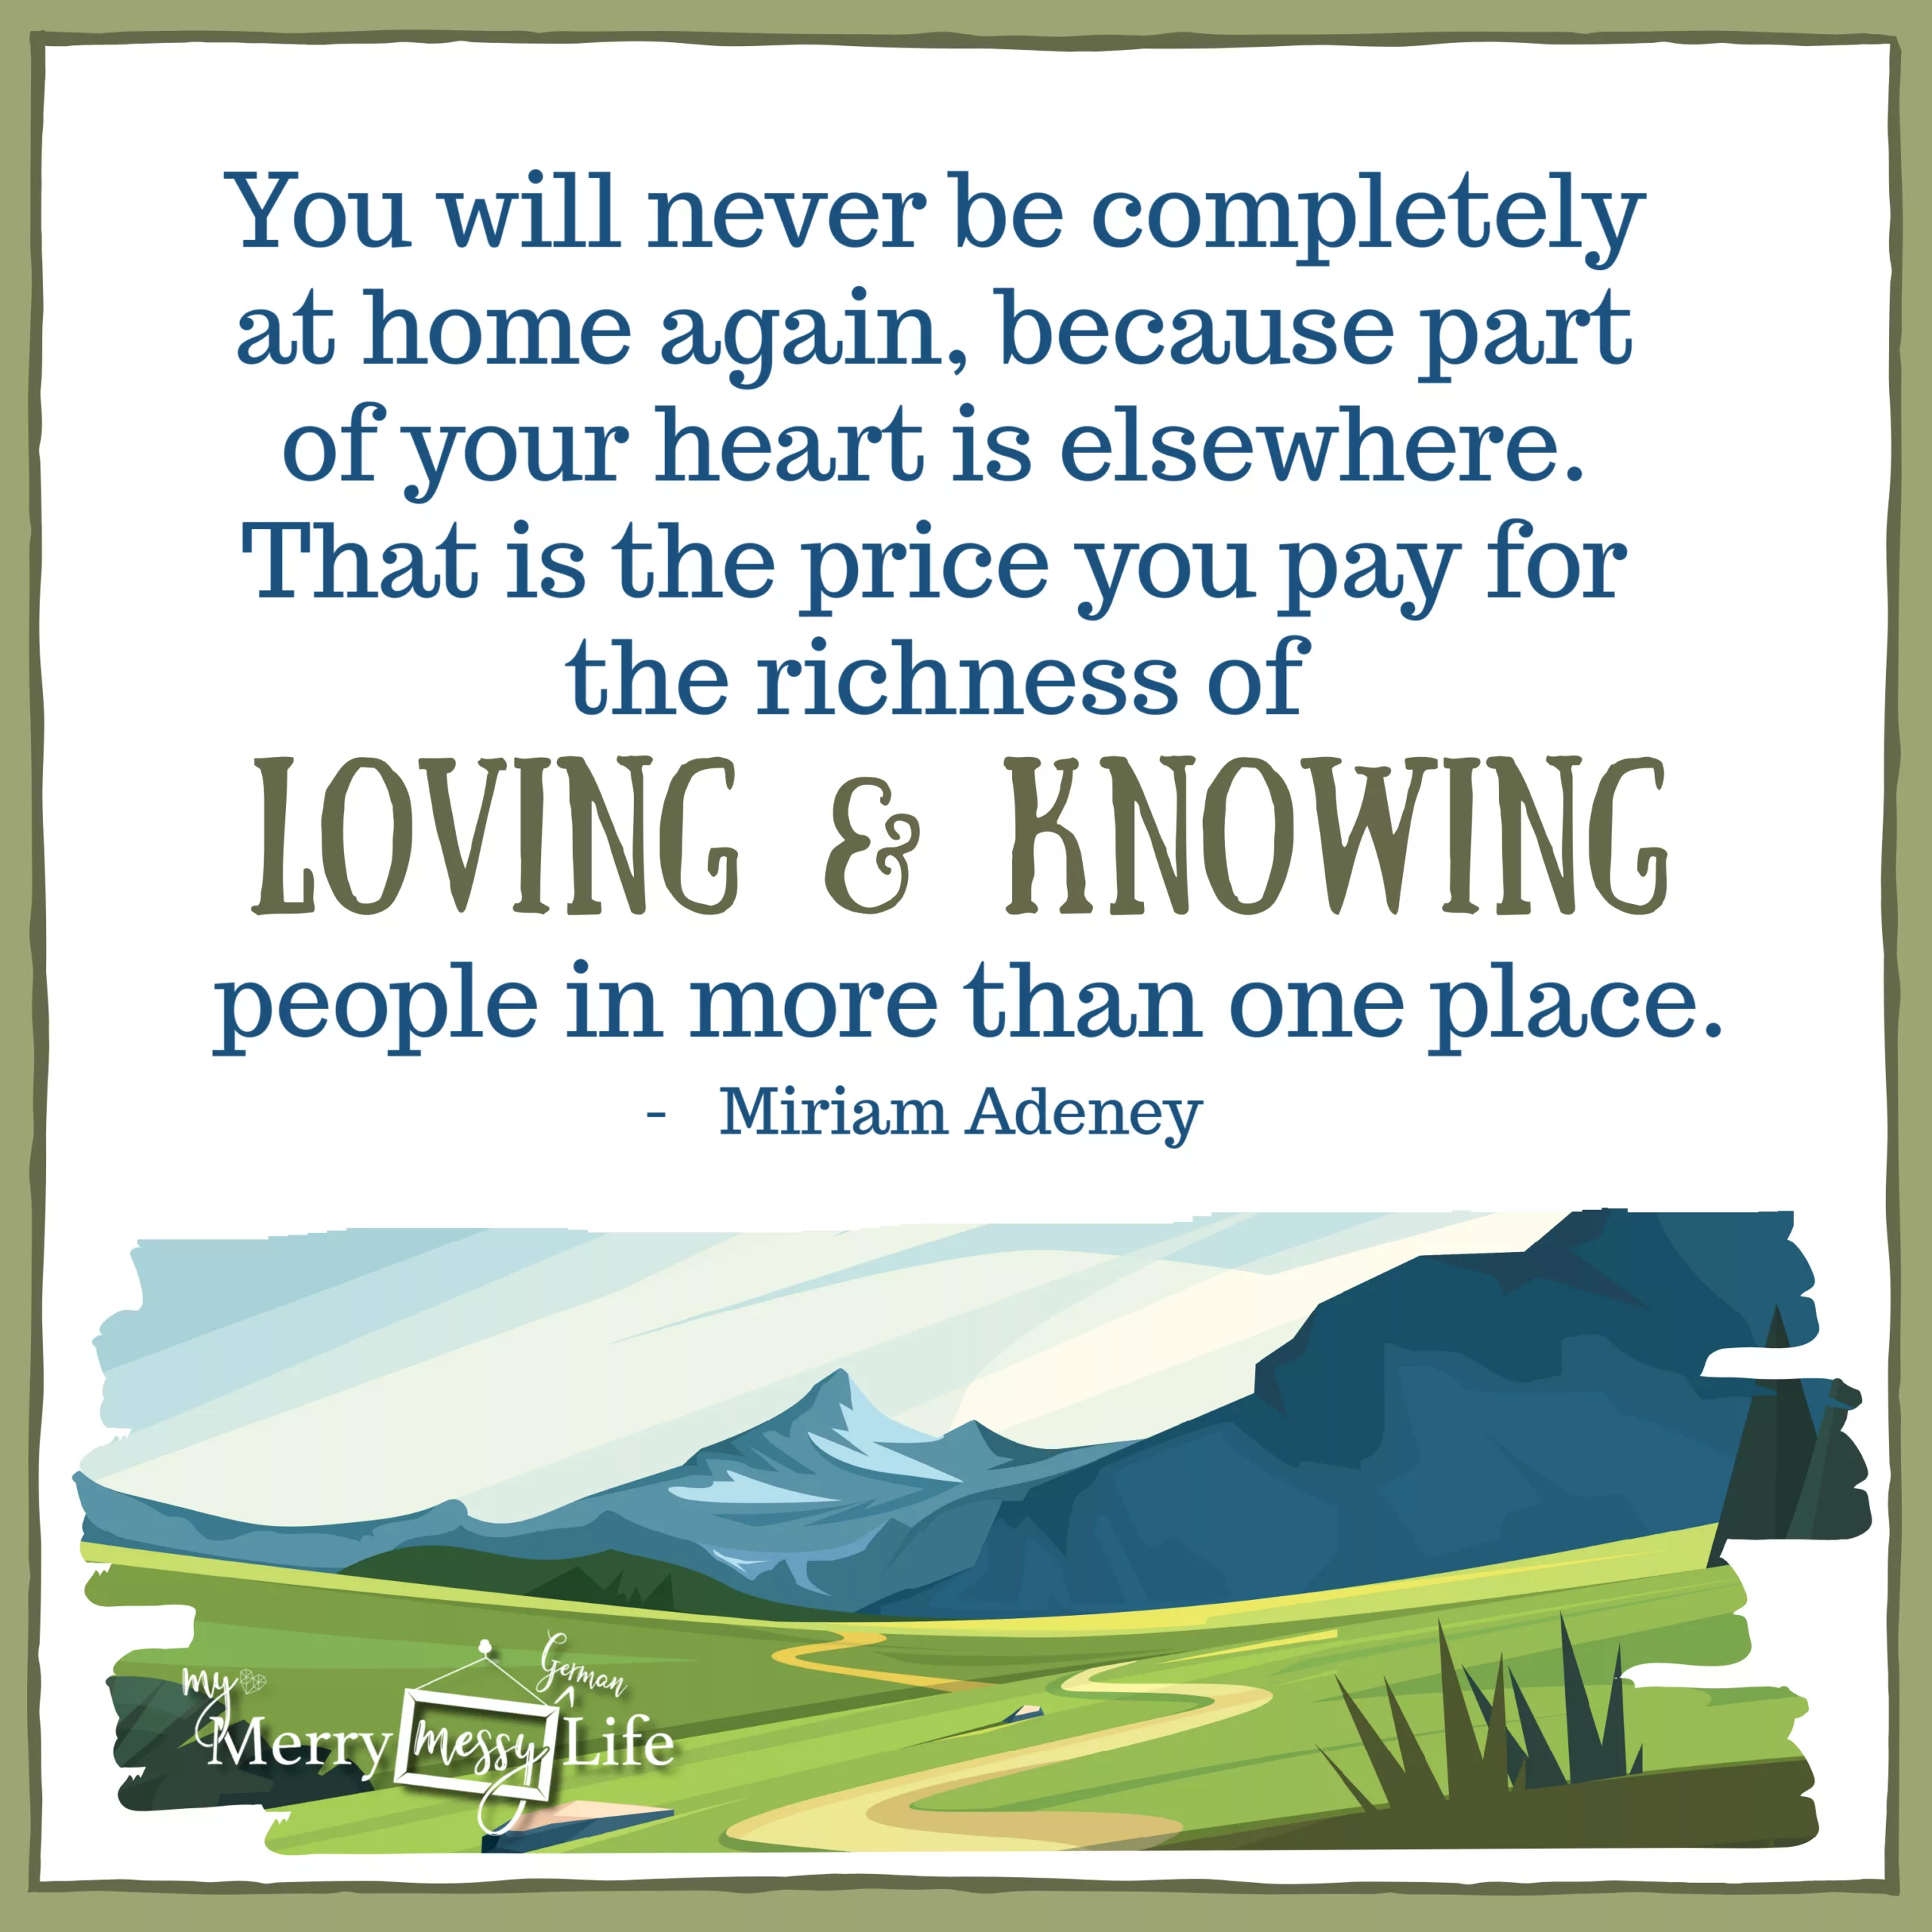 "You'll never be completely at home again, because part of your heart is elsewhere. That is the price you pay for the richness of loving and knowing people in more than one place." - Miriam Aden. Quotes about Living Abroad